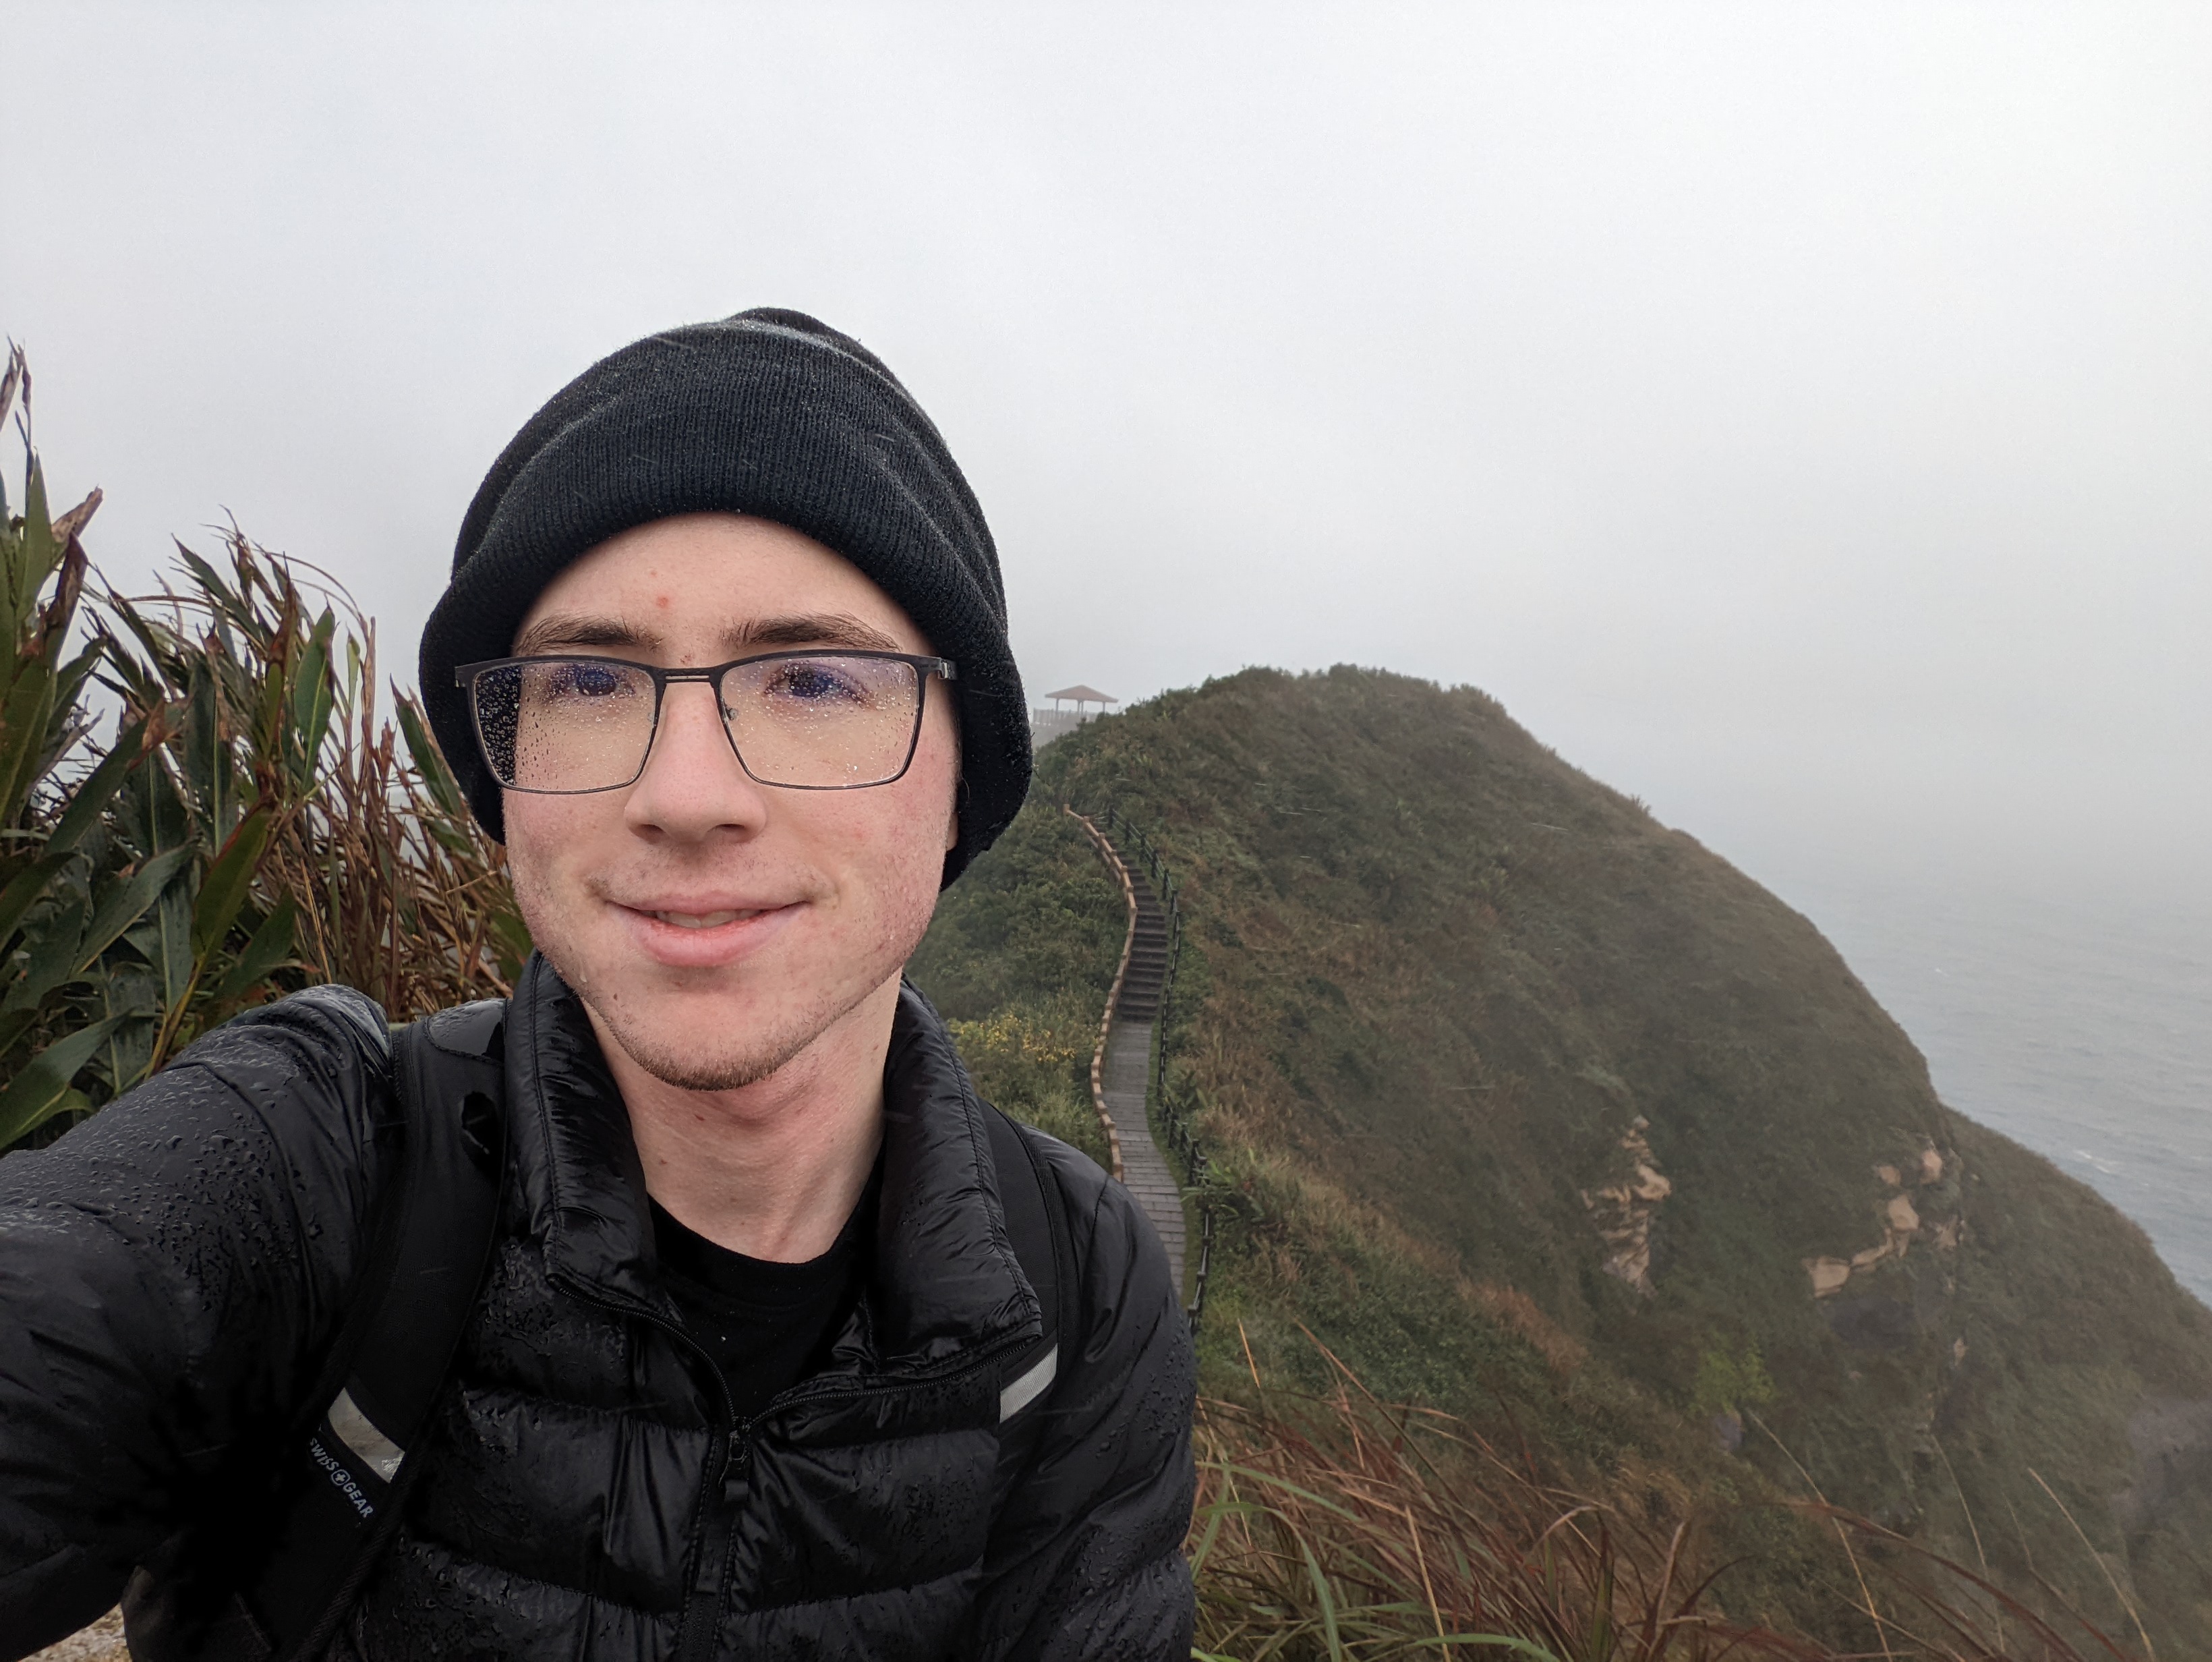 A selfie of me, Wesley Aptekar-Cassels, dsmiling at the camera in the rain and mist. There is a green hillside with a staircase on it visible in the background.